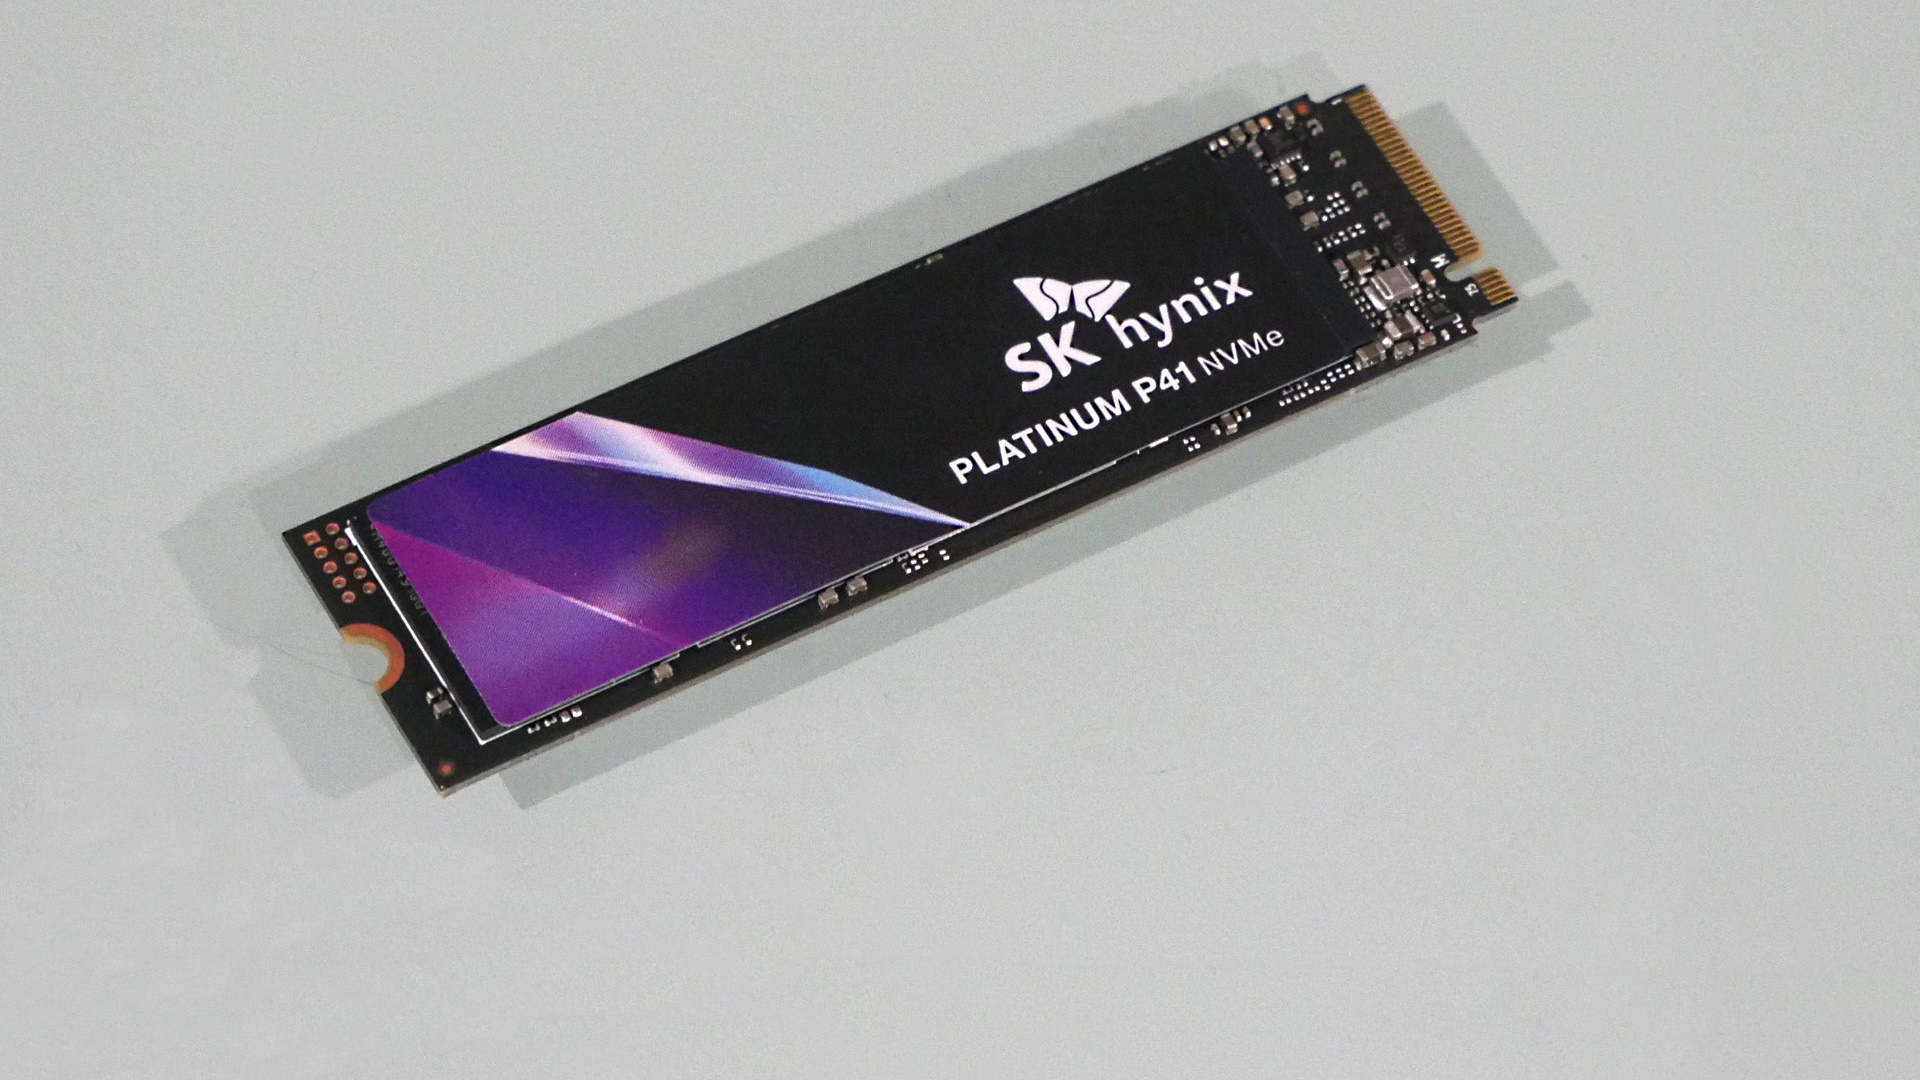  SK Hynix throws a spanner into Western Digital's plan to merge with Kioxia, but it might not be game over just yet 